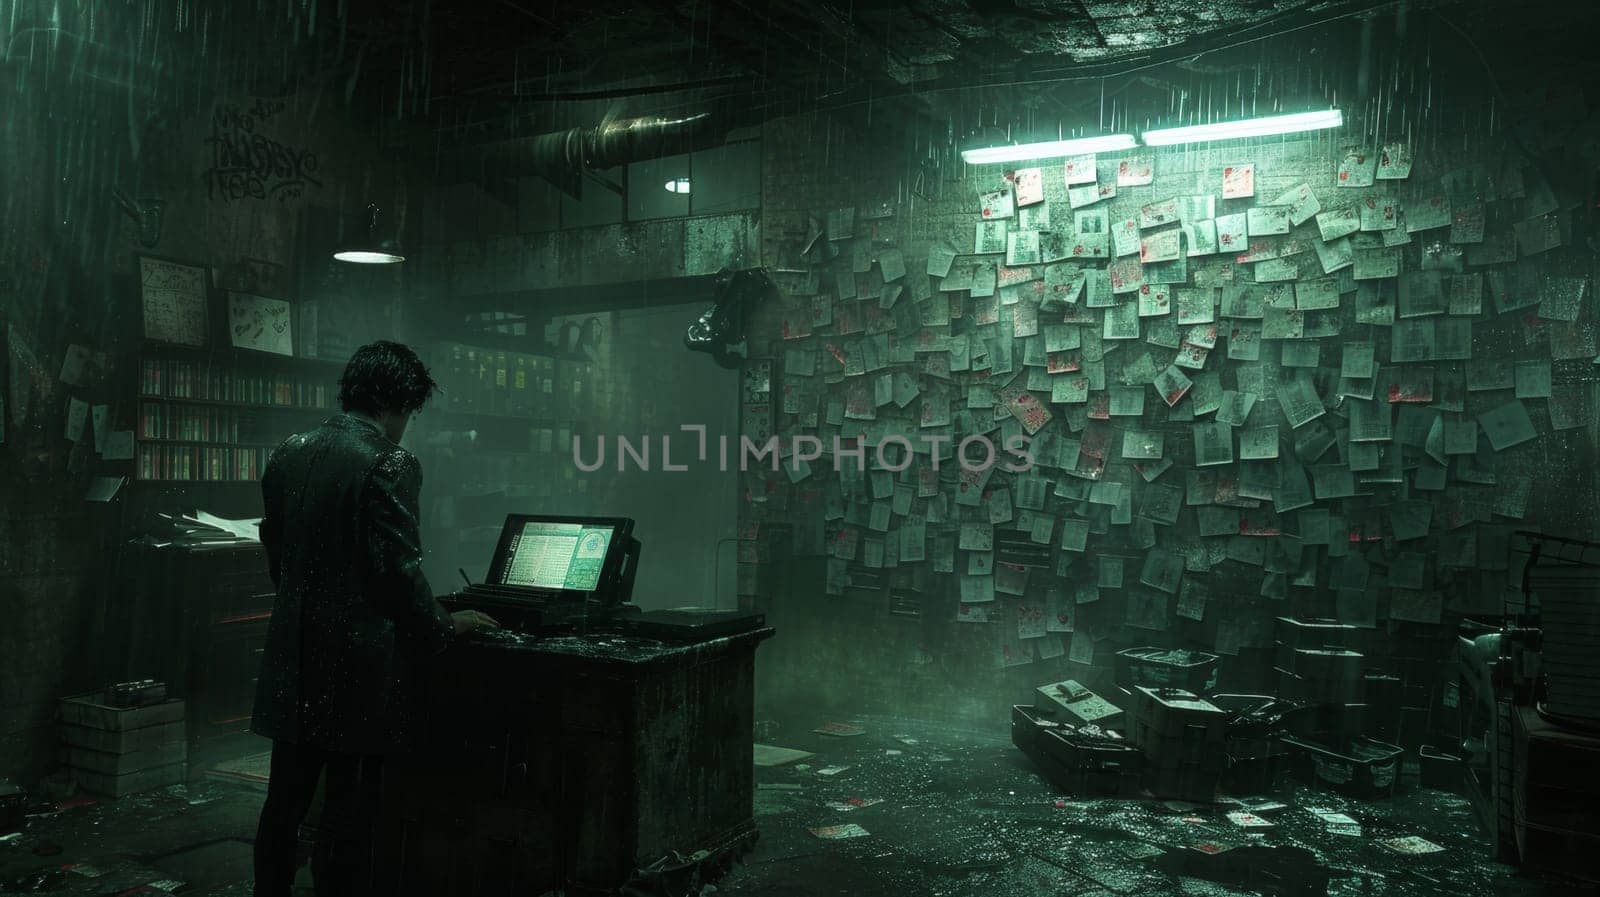 A man standing in a room with books on the wall, AI by starush